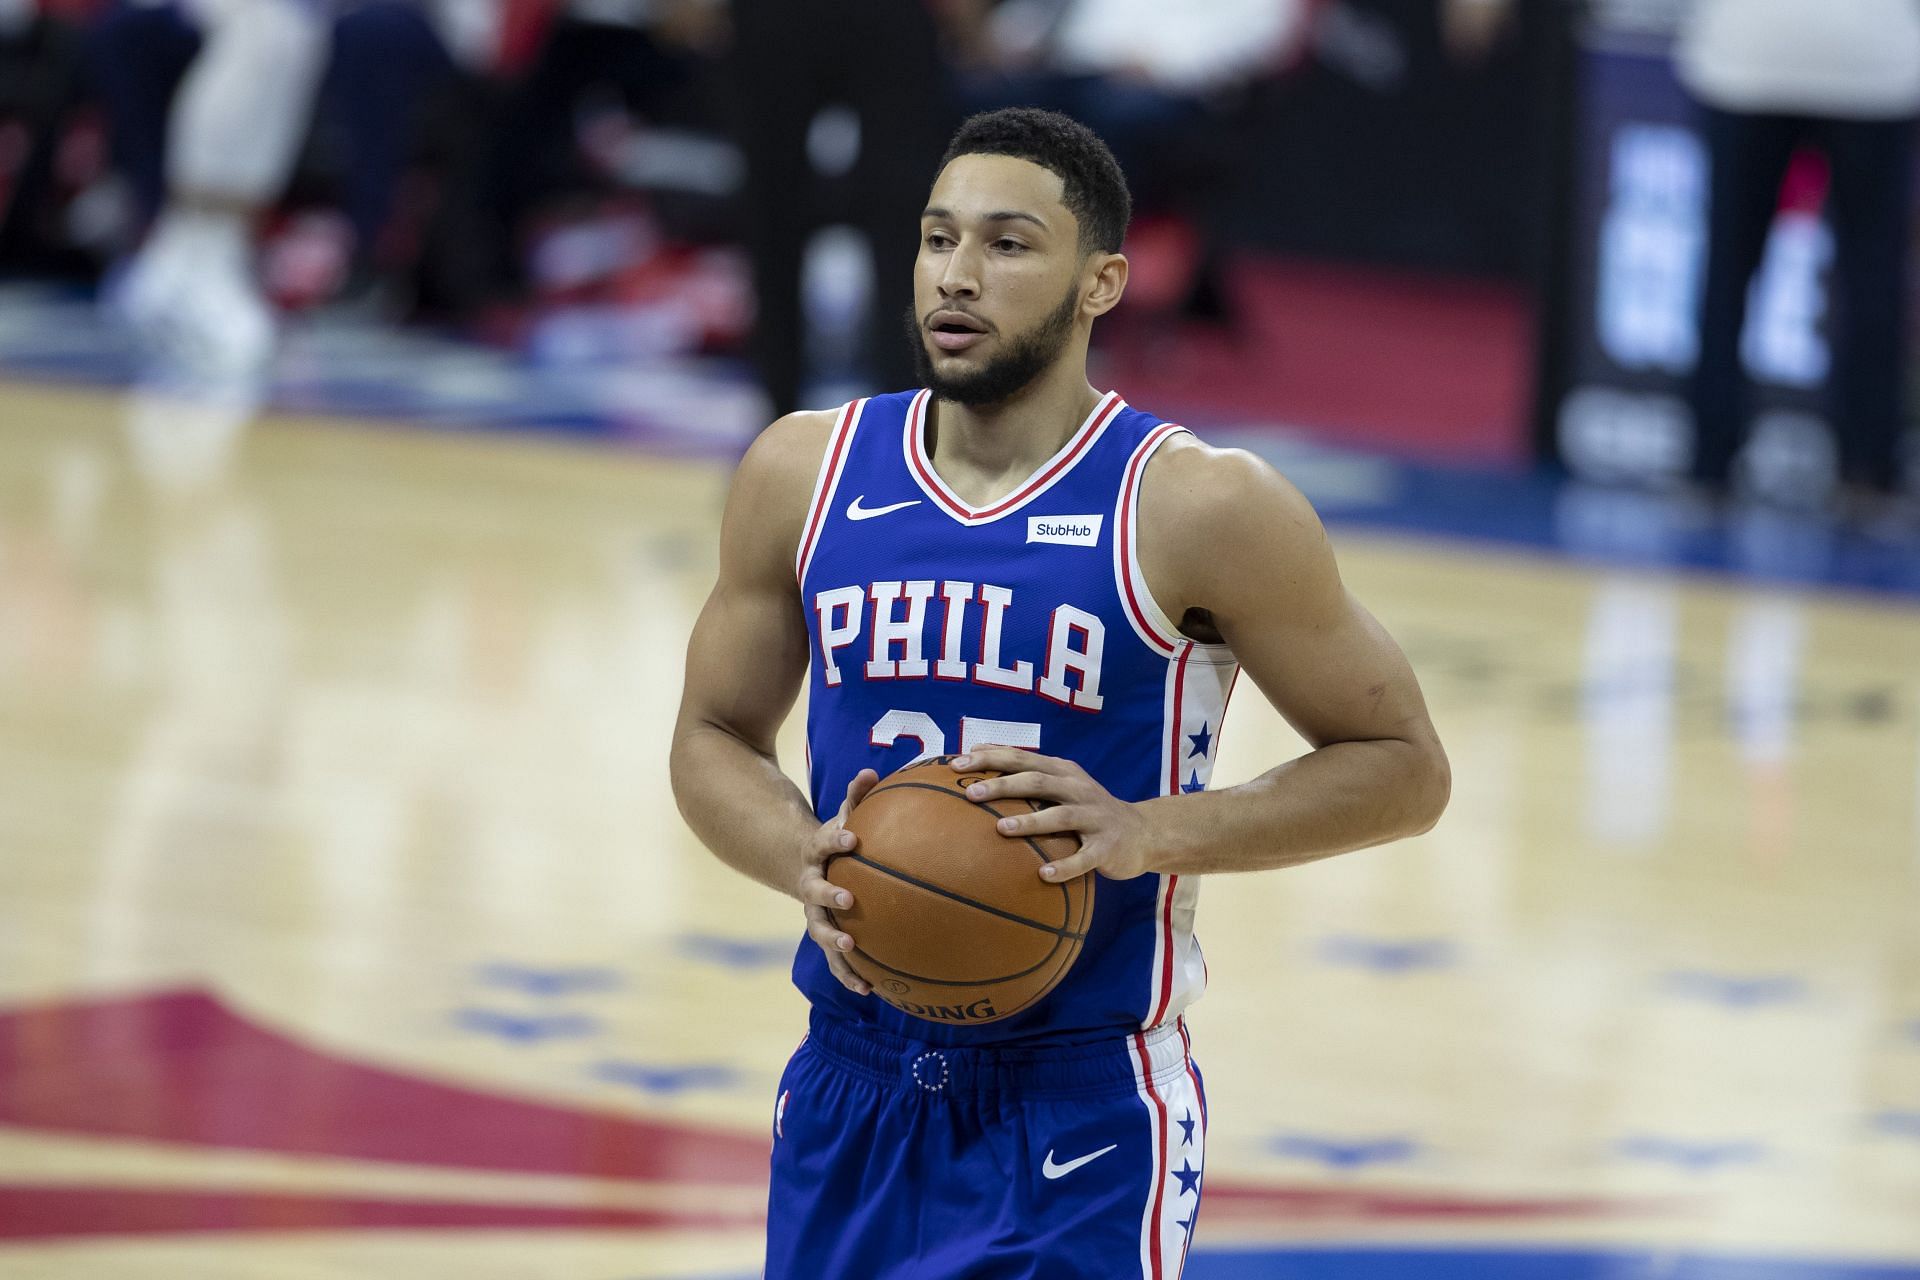 Ben Simmons misses media day, but 76ers say: 'We expect him to be back